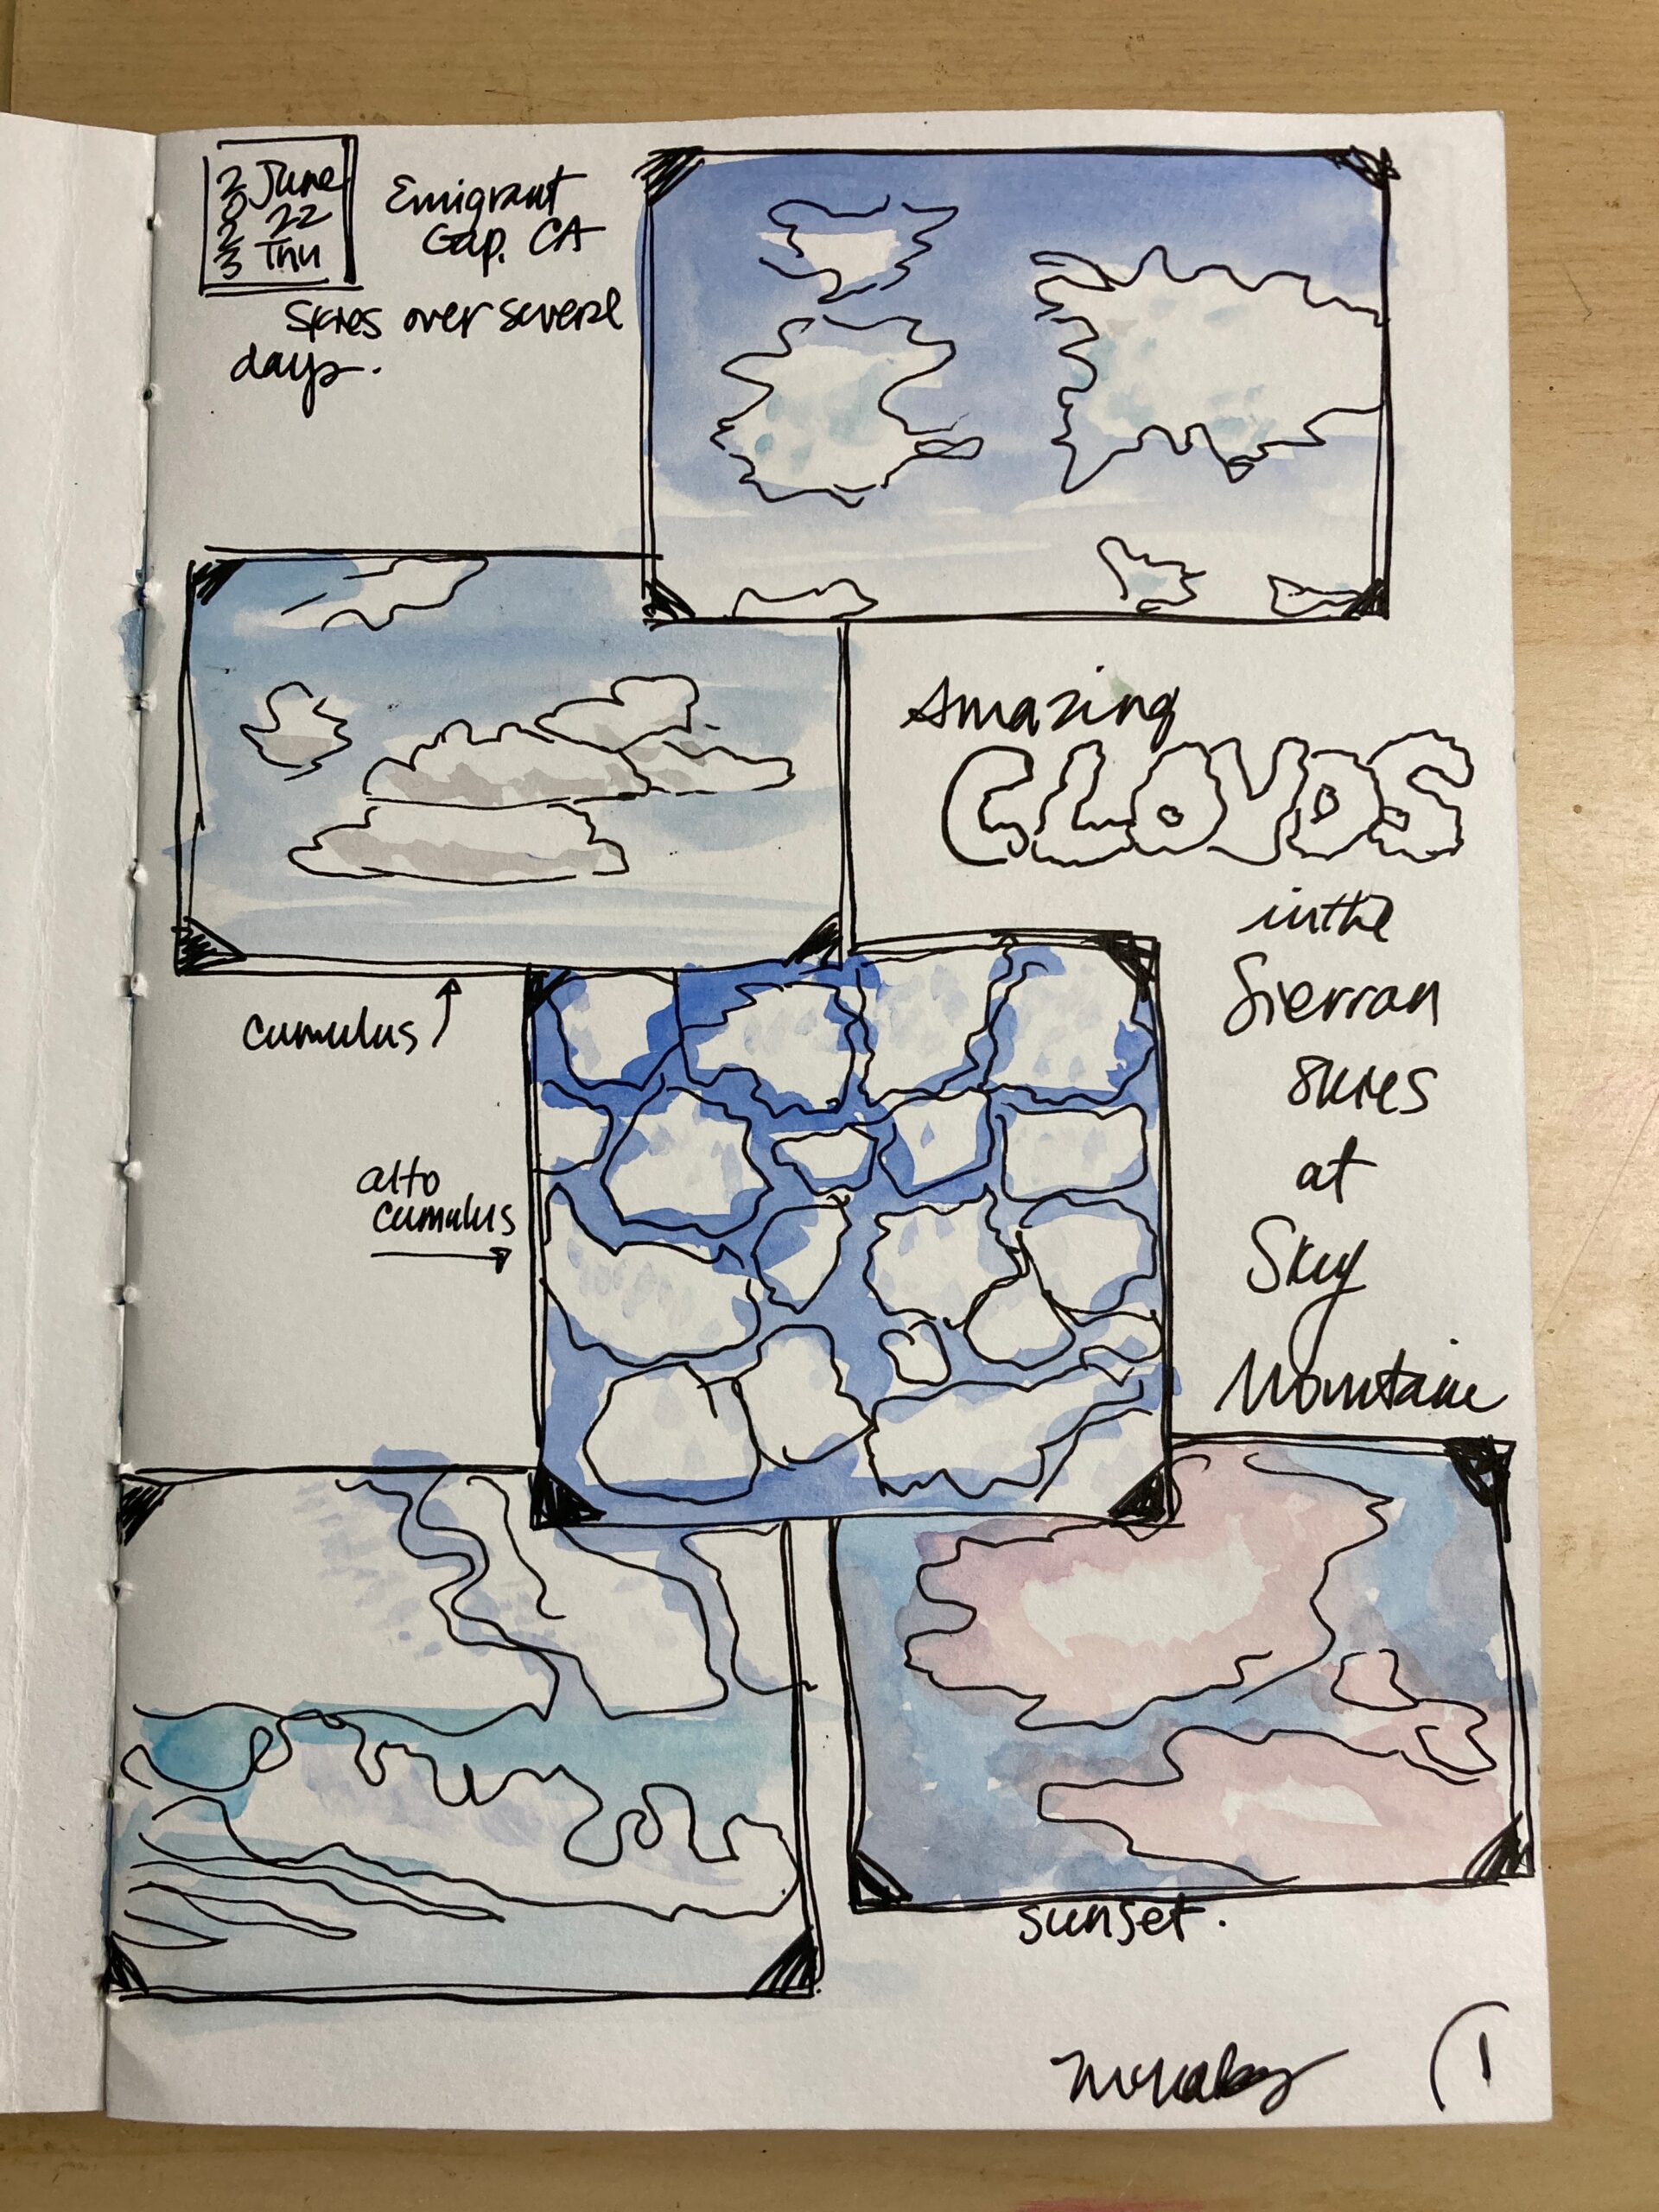 Fueled by Clouds & Coffee: Sketch Journal of an Ordinary Day